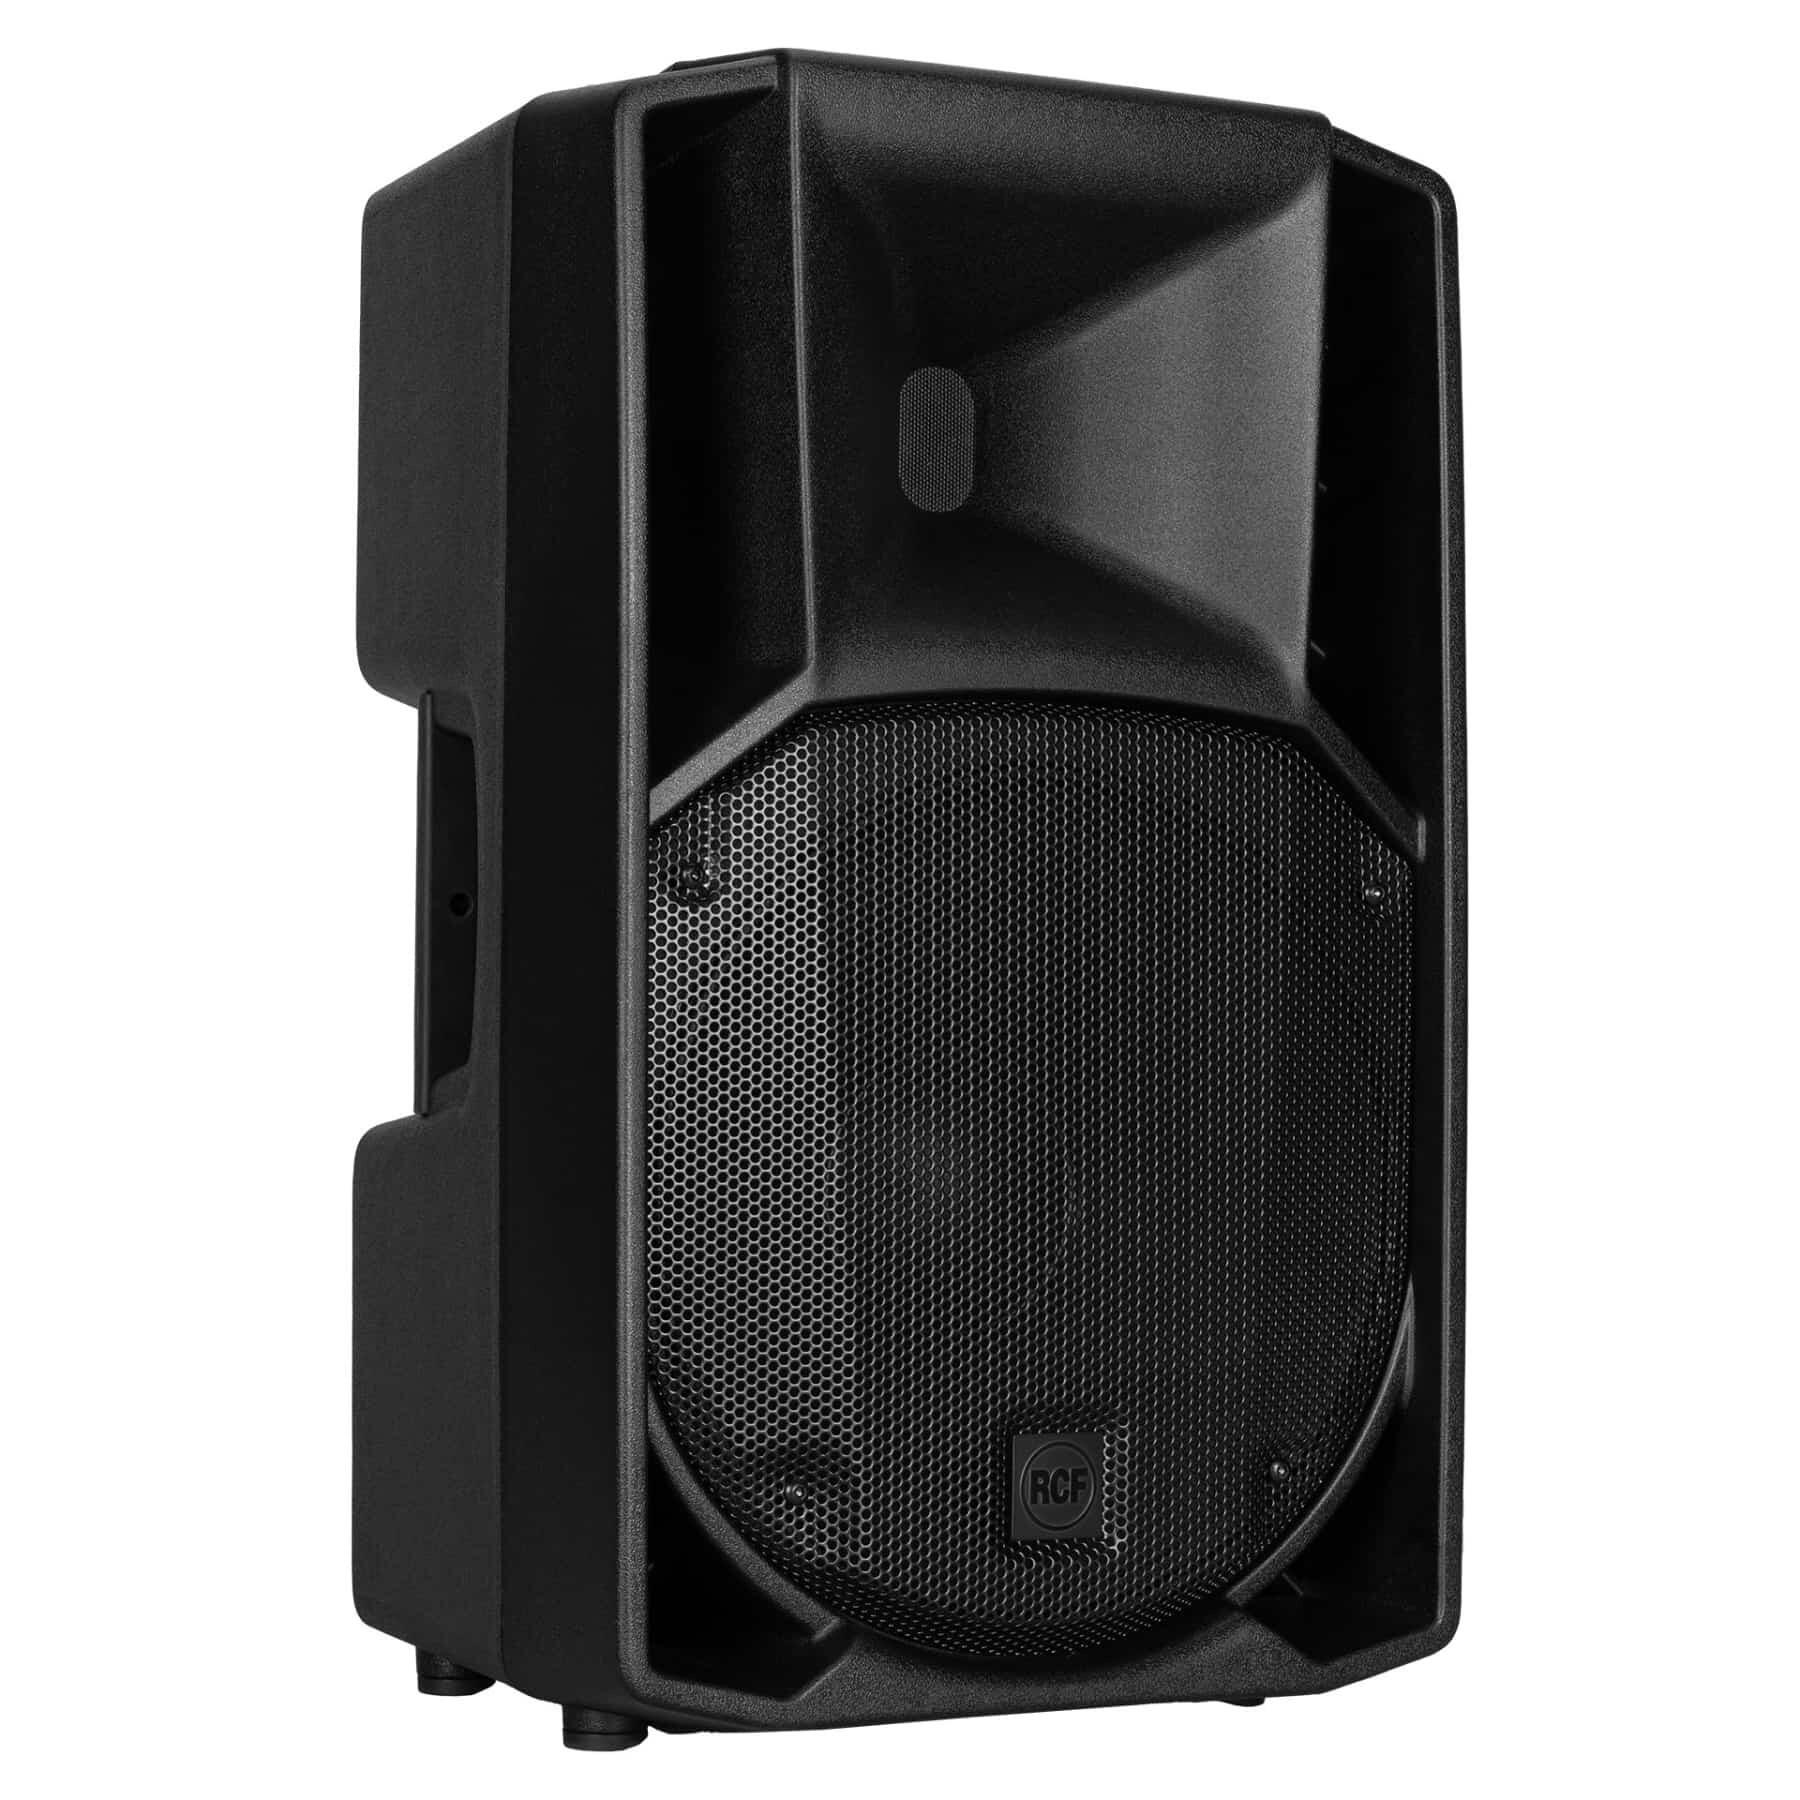 RCF ART 712-A MK5 Active Speaker right